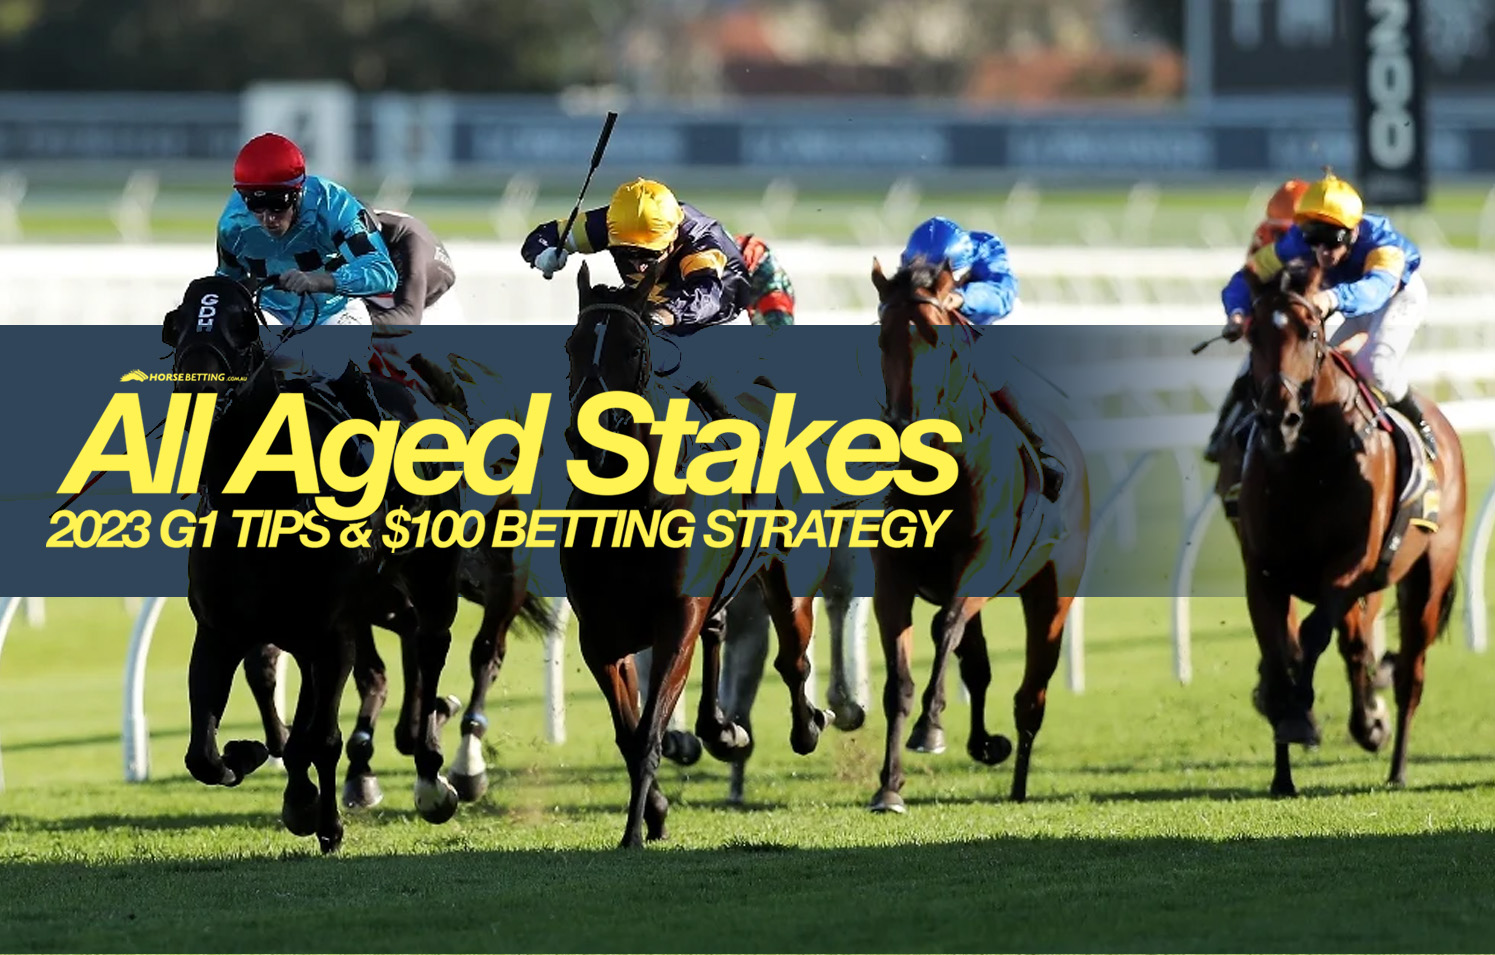 All Aged Stakes betting tips